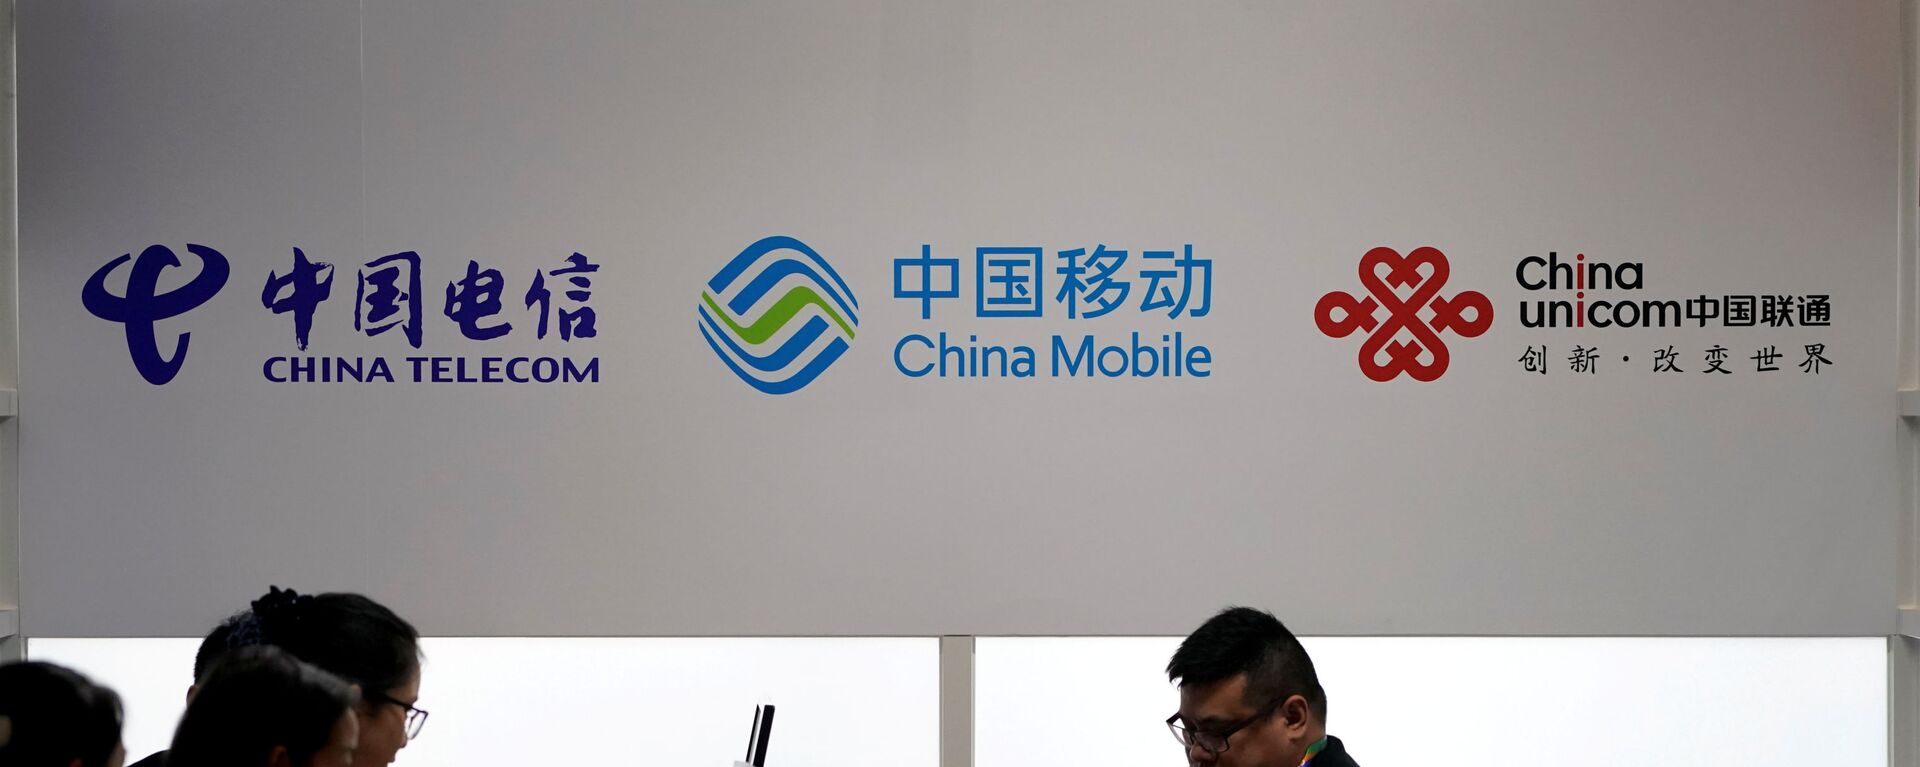 Signs of China Telecom, China Mobile and China Unicom are seen during the China International Import Expo (CIIE)  - 俄羅斯衛星通訊社, 1920, 11.01.2021